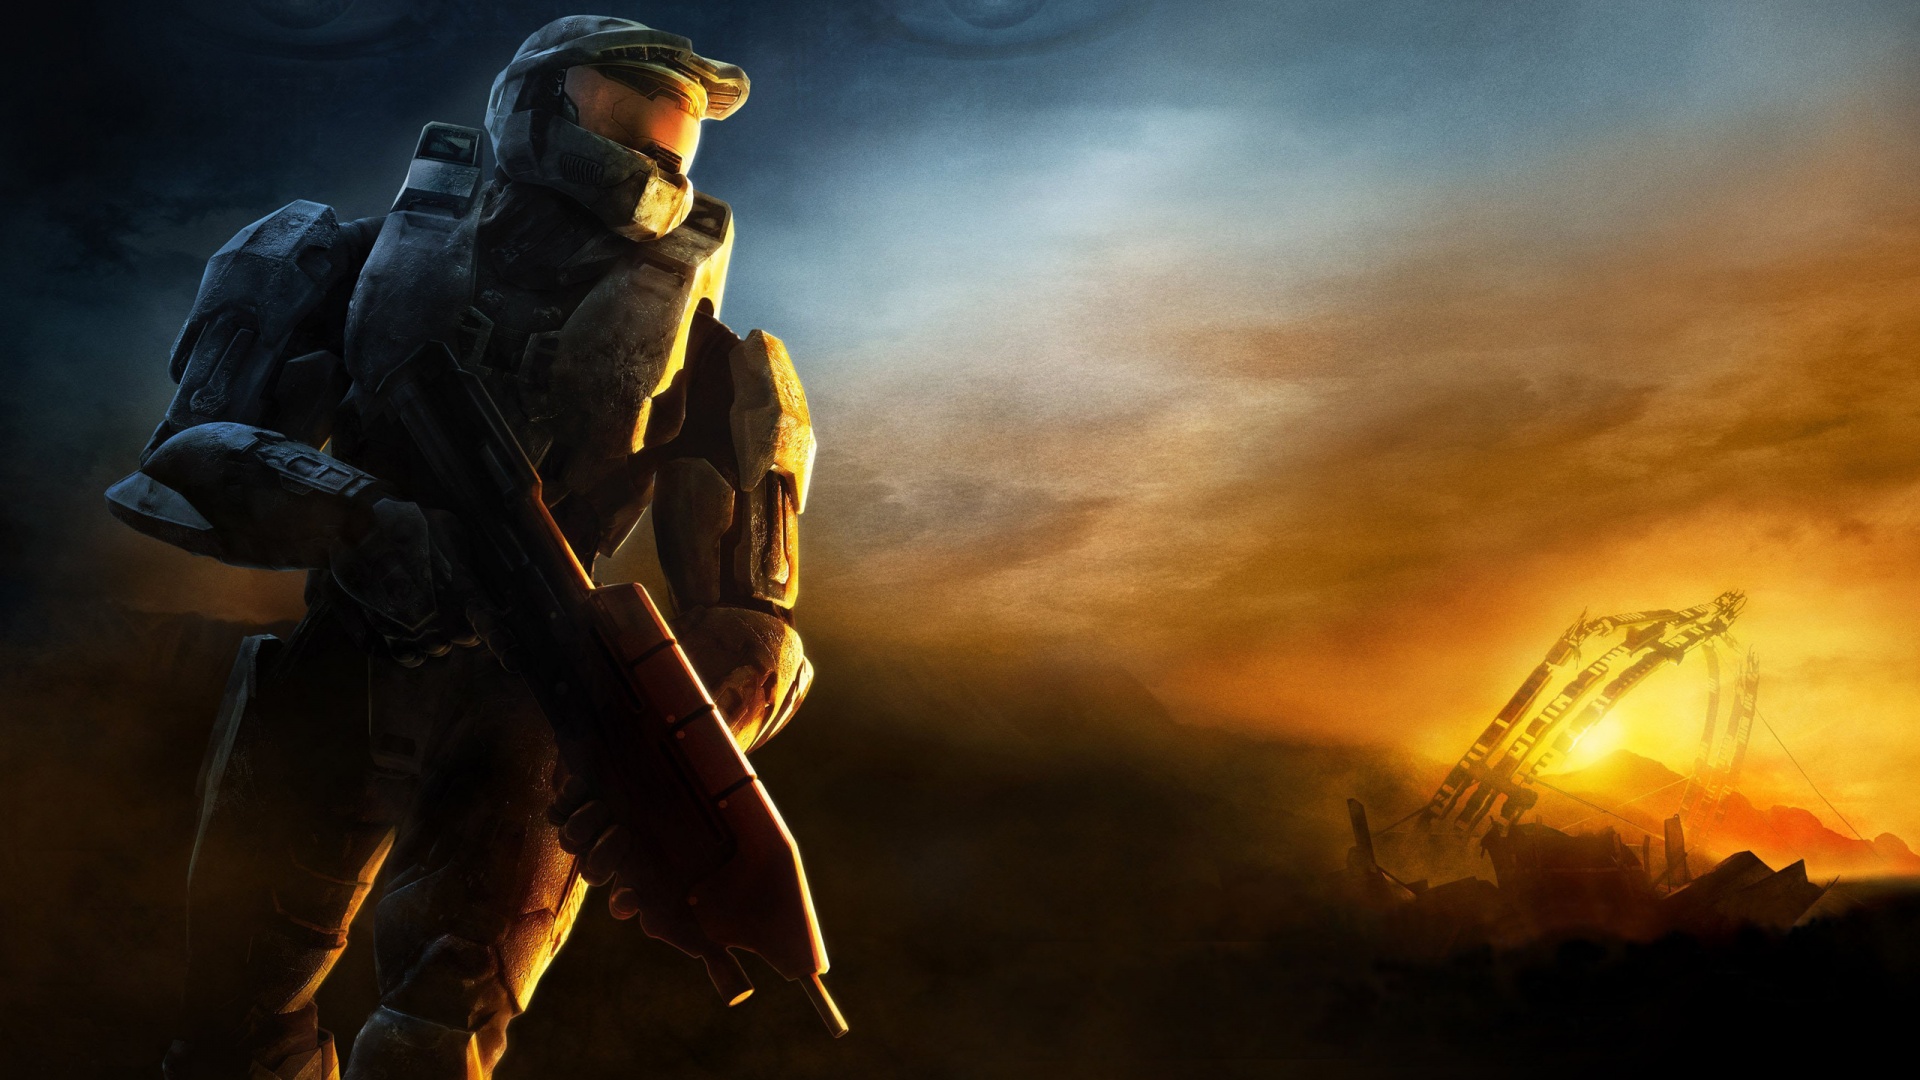 HALO 3 Game Wallpapers HD Wallpapers 1920x1080